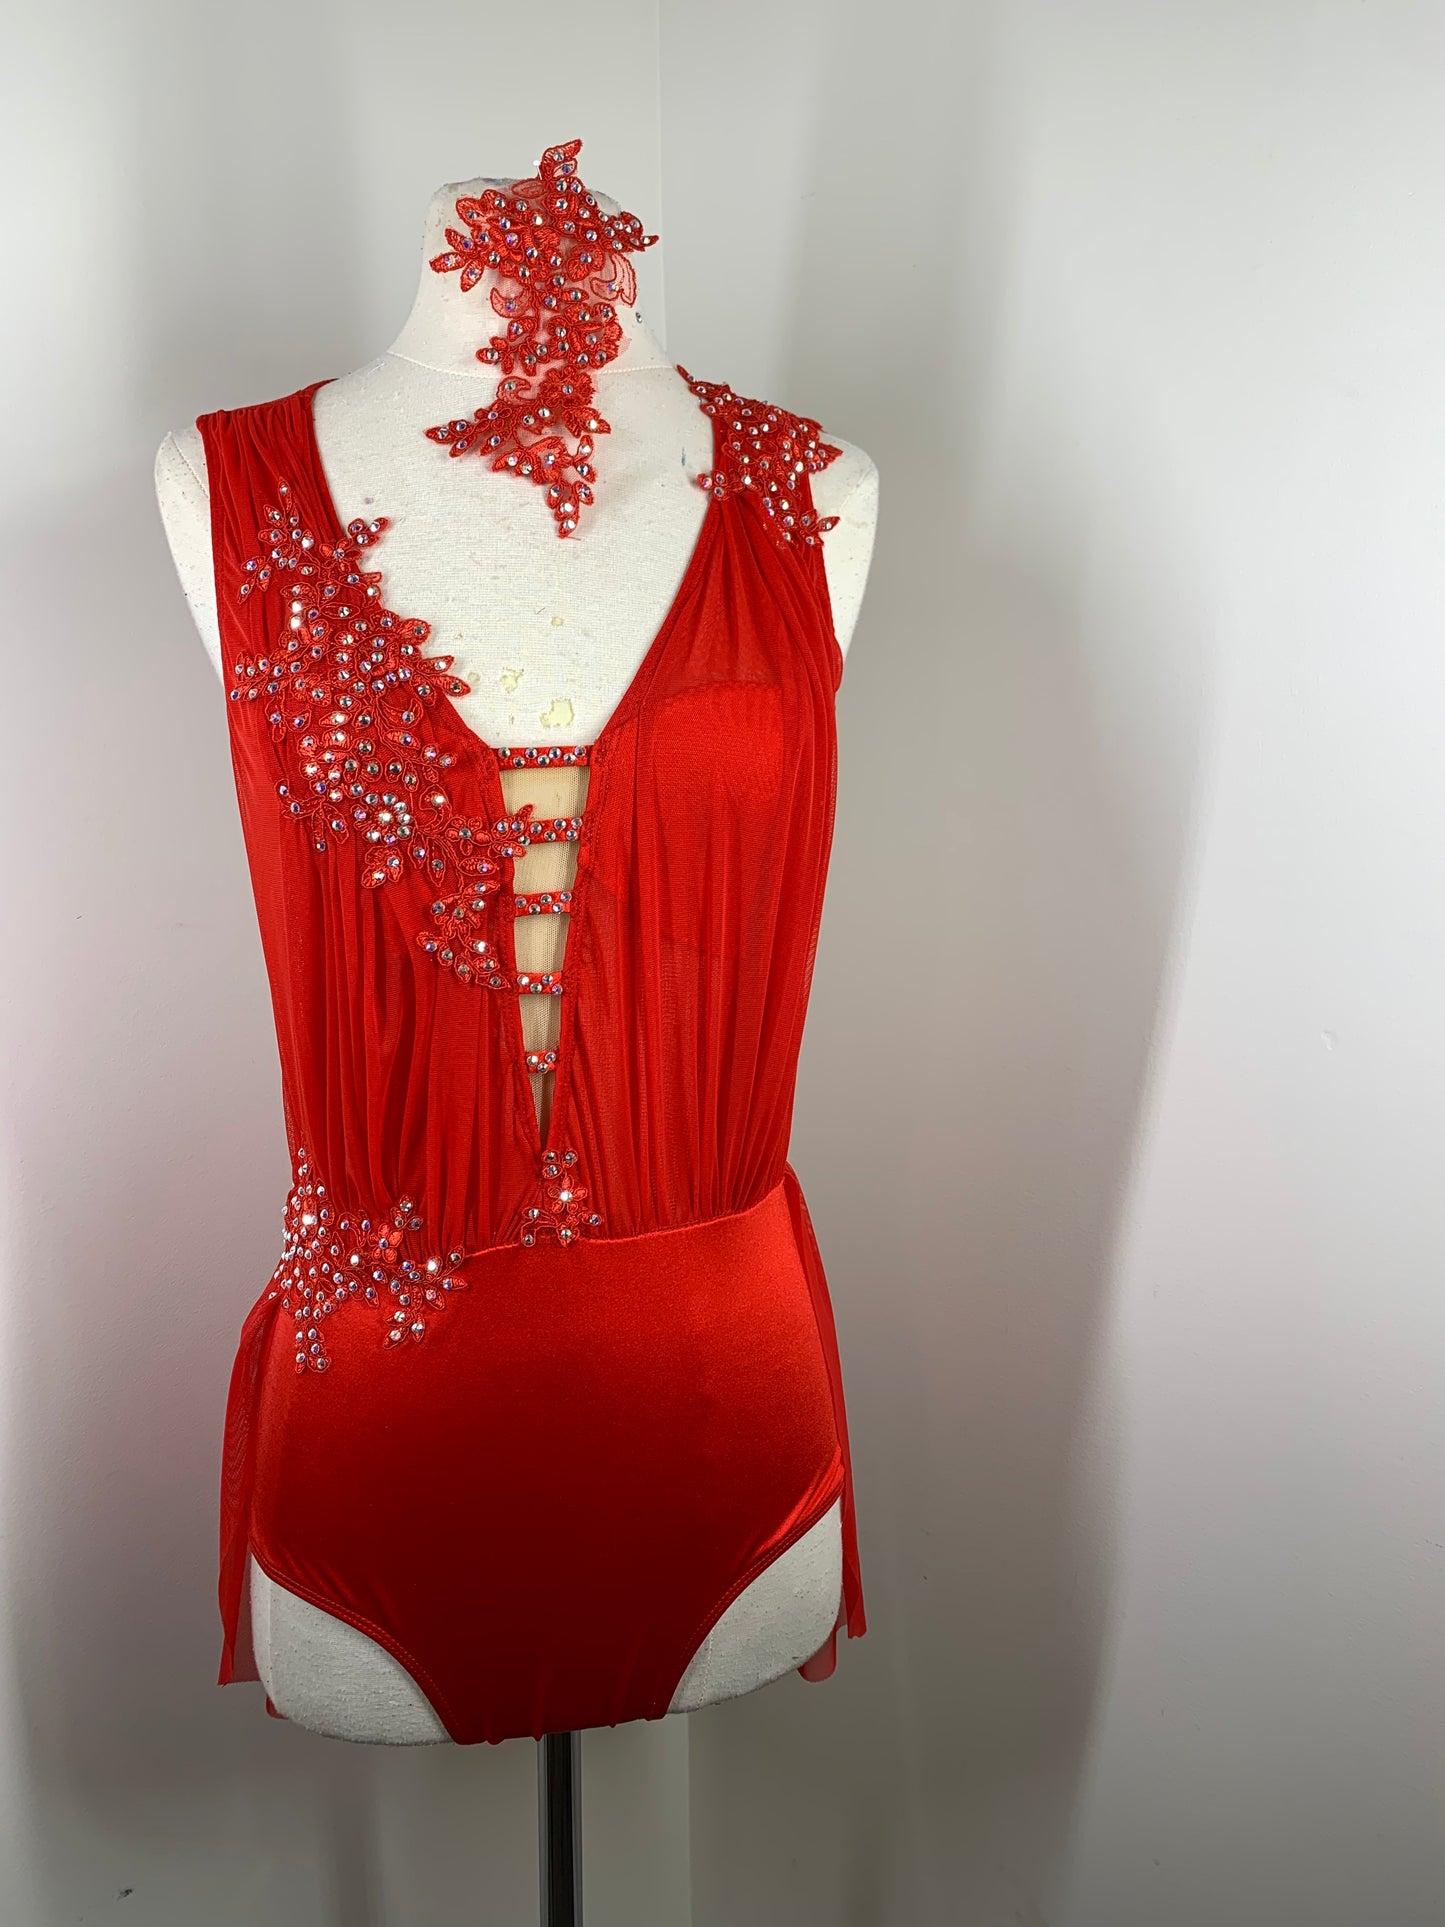 Crimson Red Sage costume with crystal ab stones and appliques